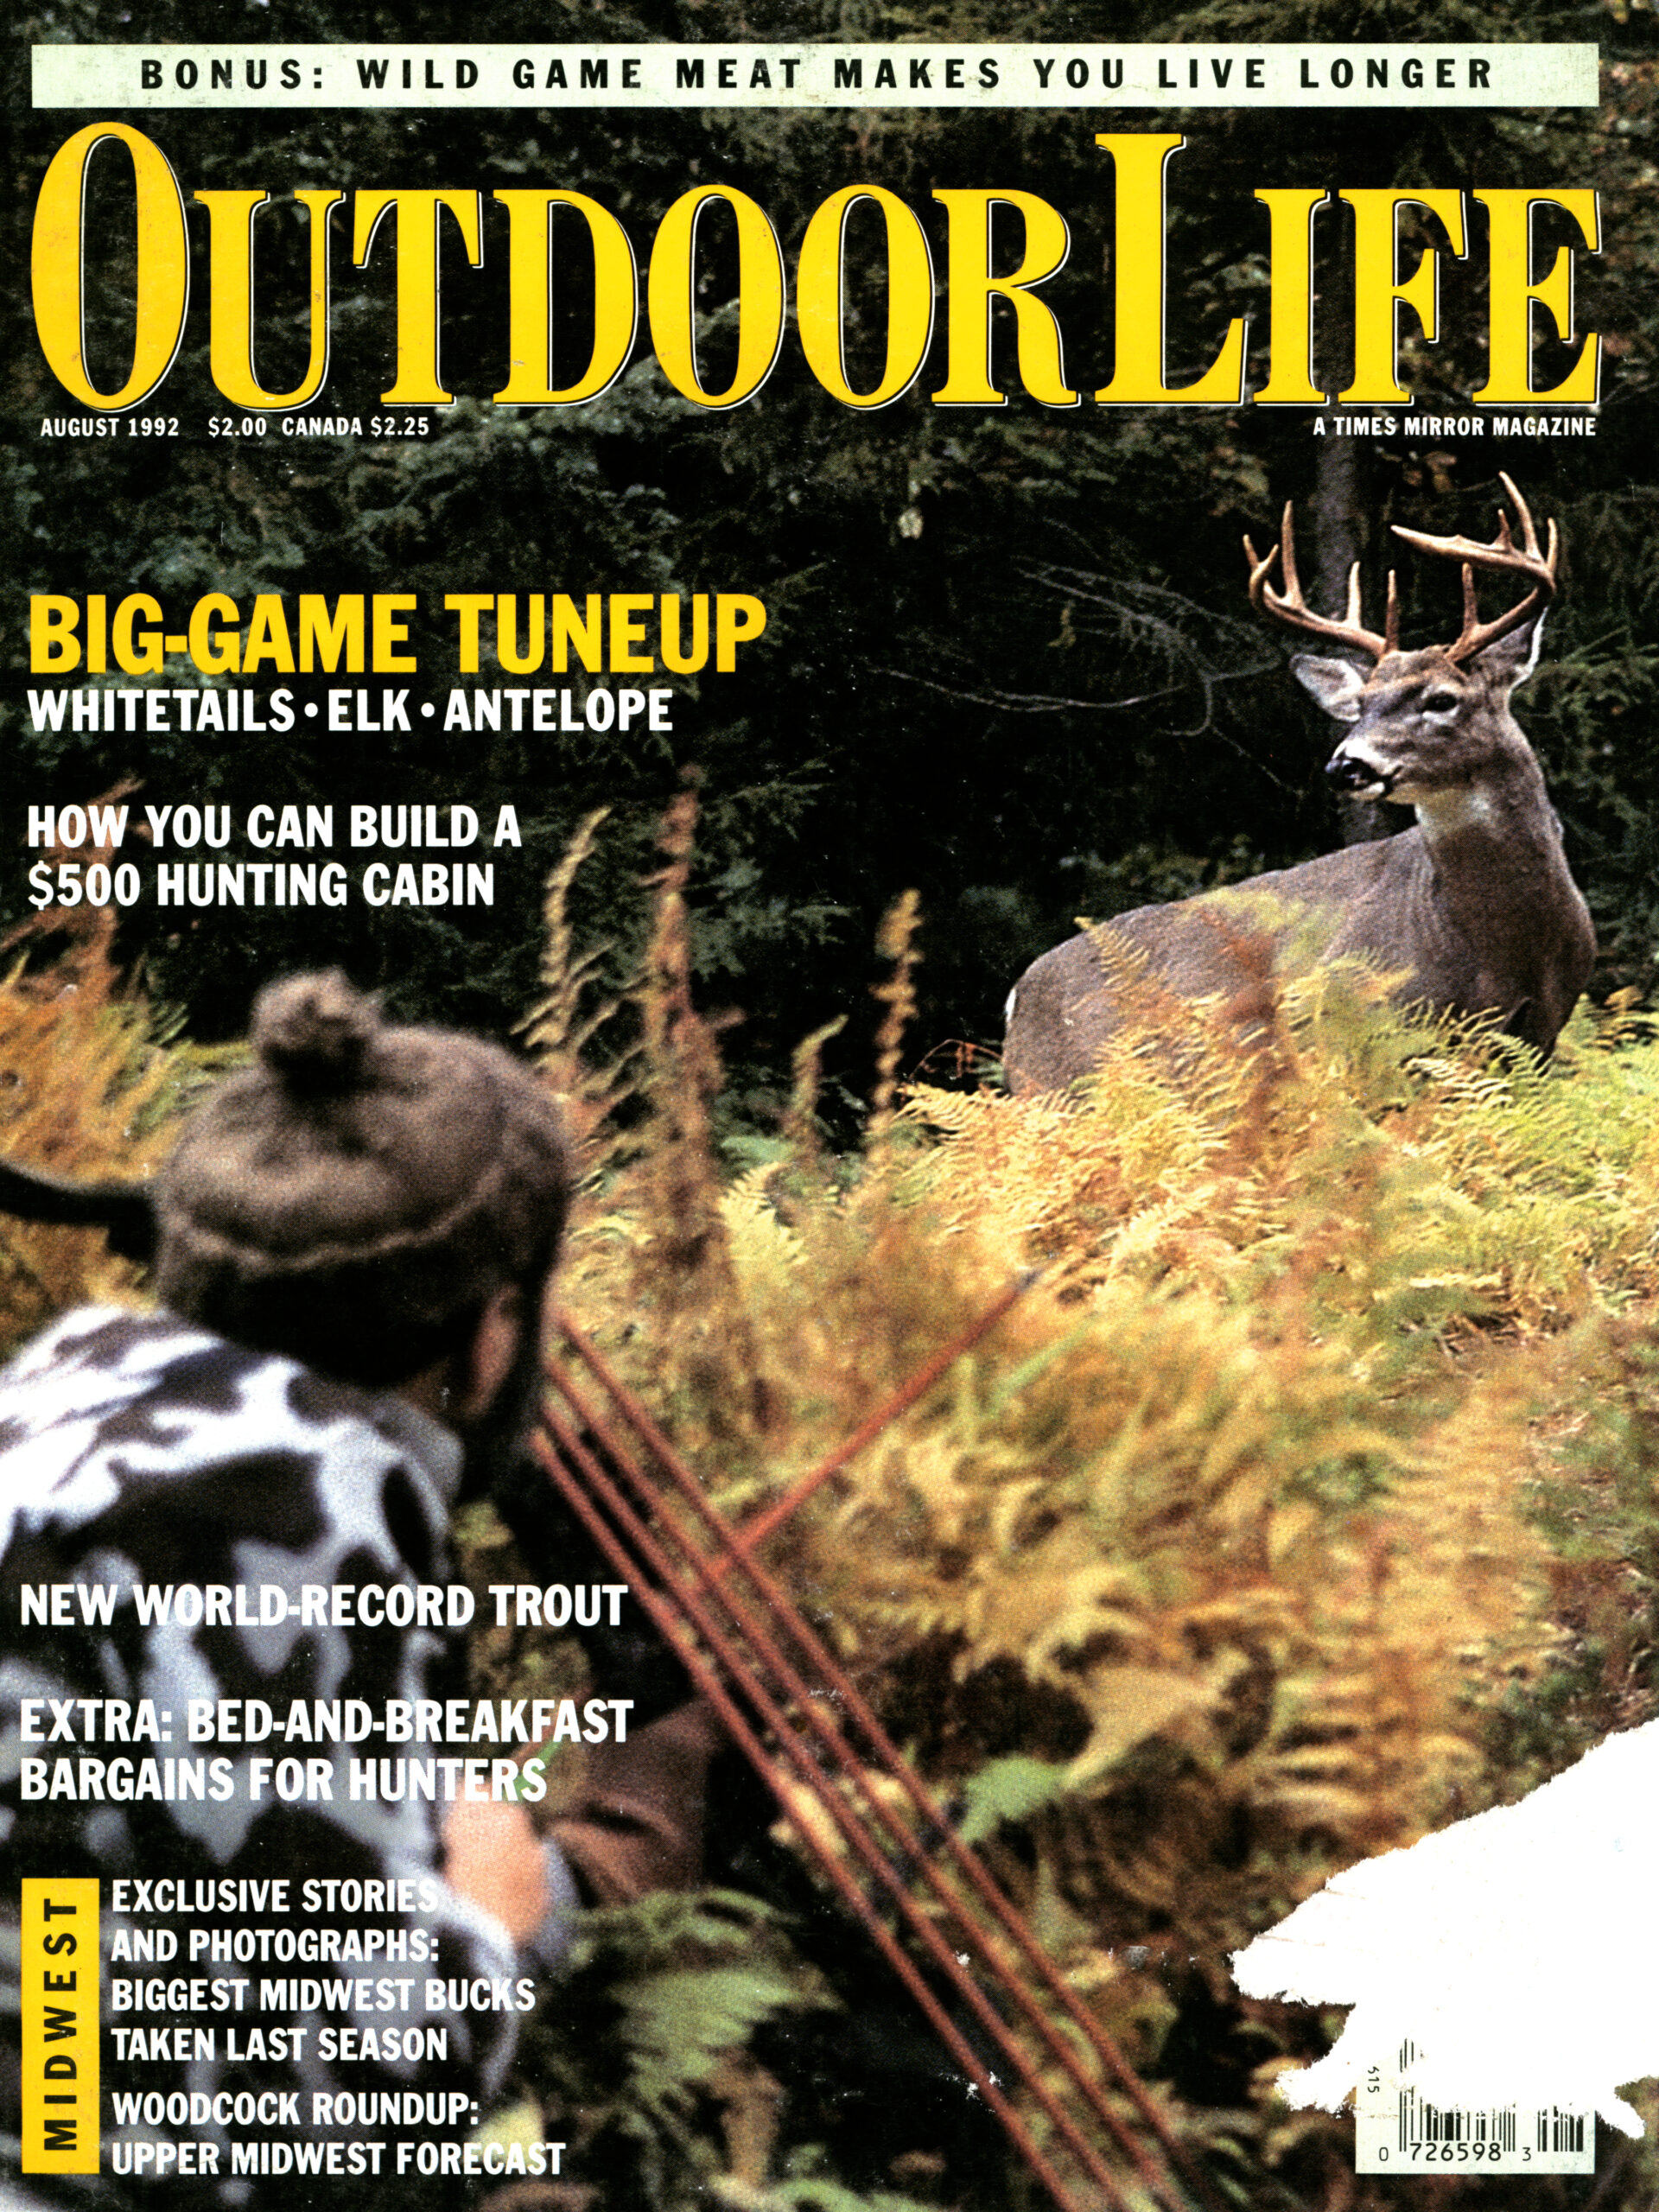 August 1992 cover of Outdoor Life magazine shows bowhunter and whitetail buck